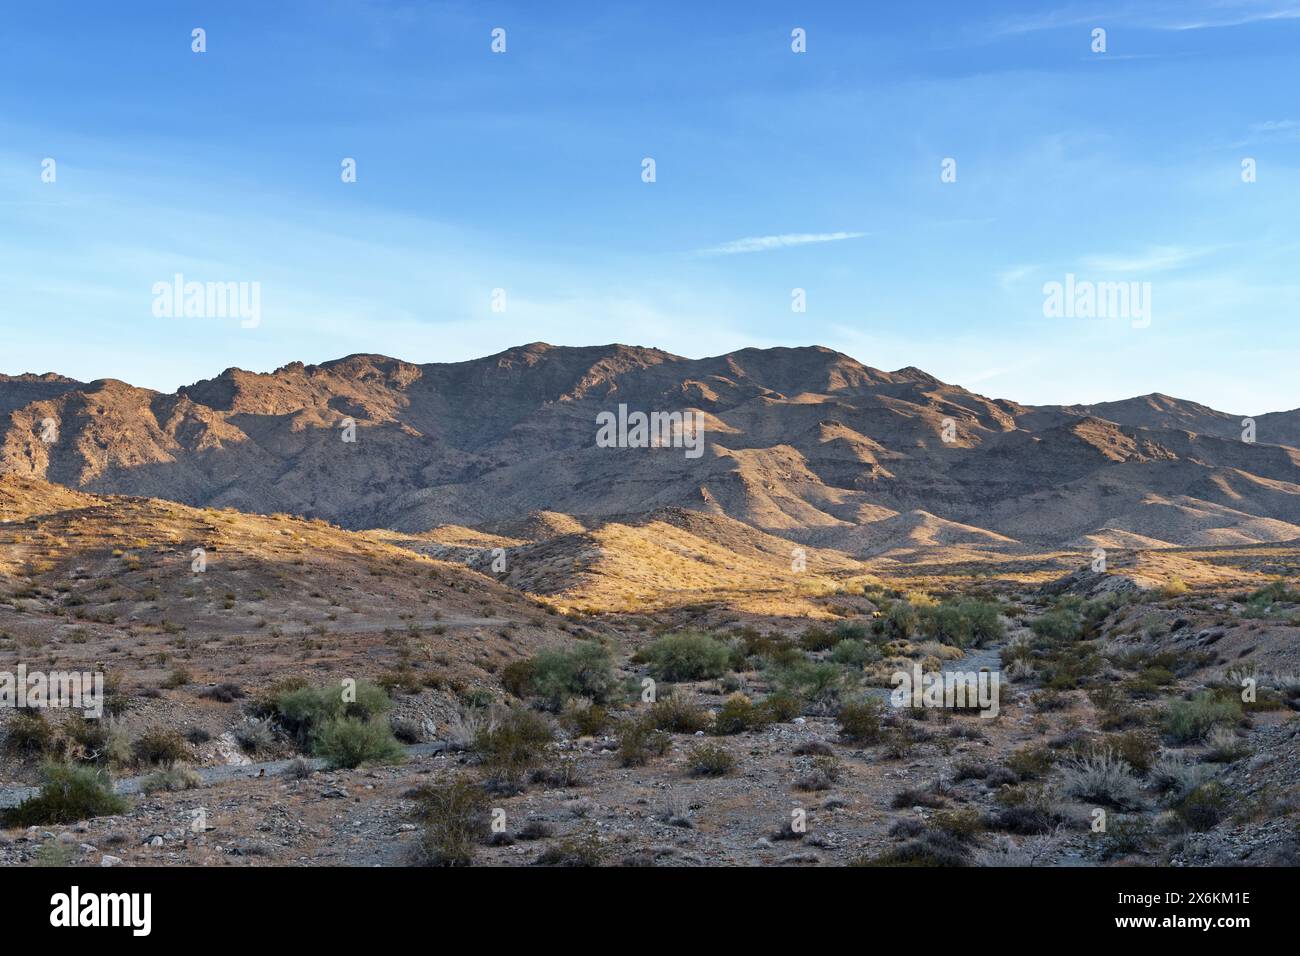 4130 foot tall Whipple Mountains High Point Mountain in the Mojave Desert of eastern California Stock Photo